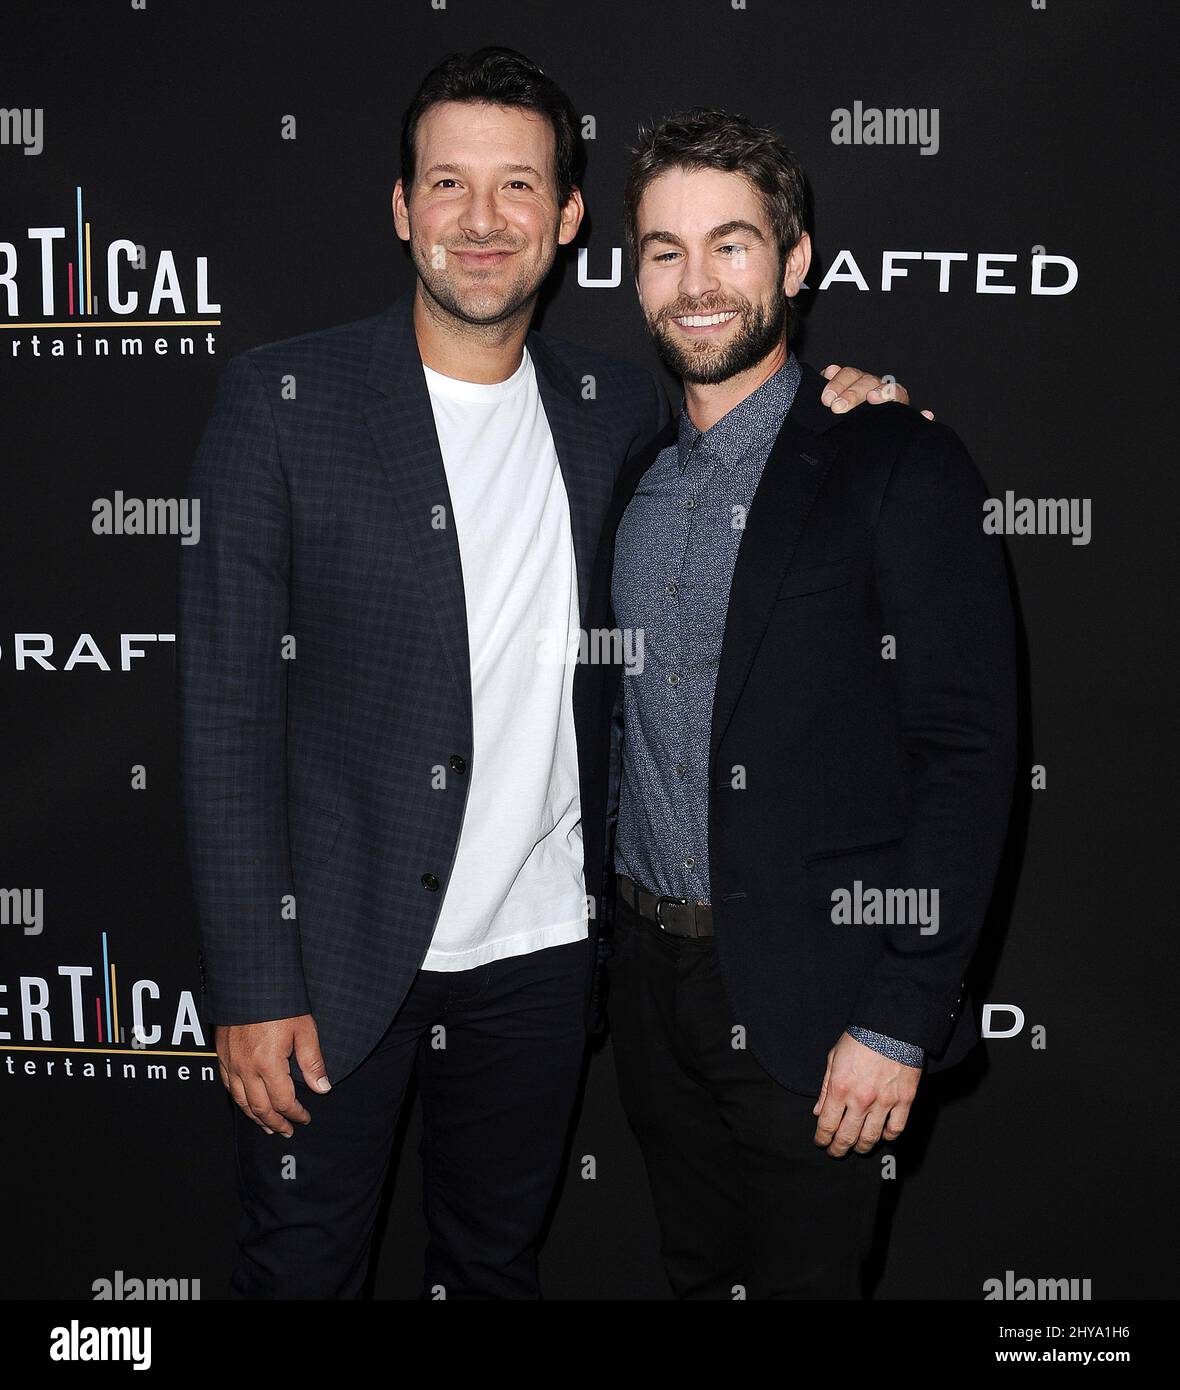 Tony Romo, Chace Crawford attending the premiere of Undrafted in Los Angeles, California. Stock Photo